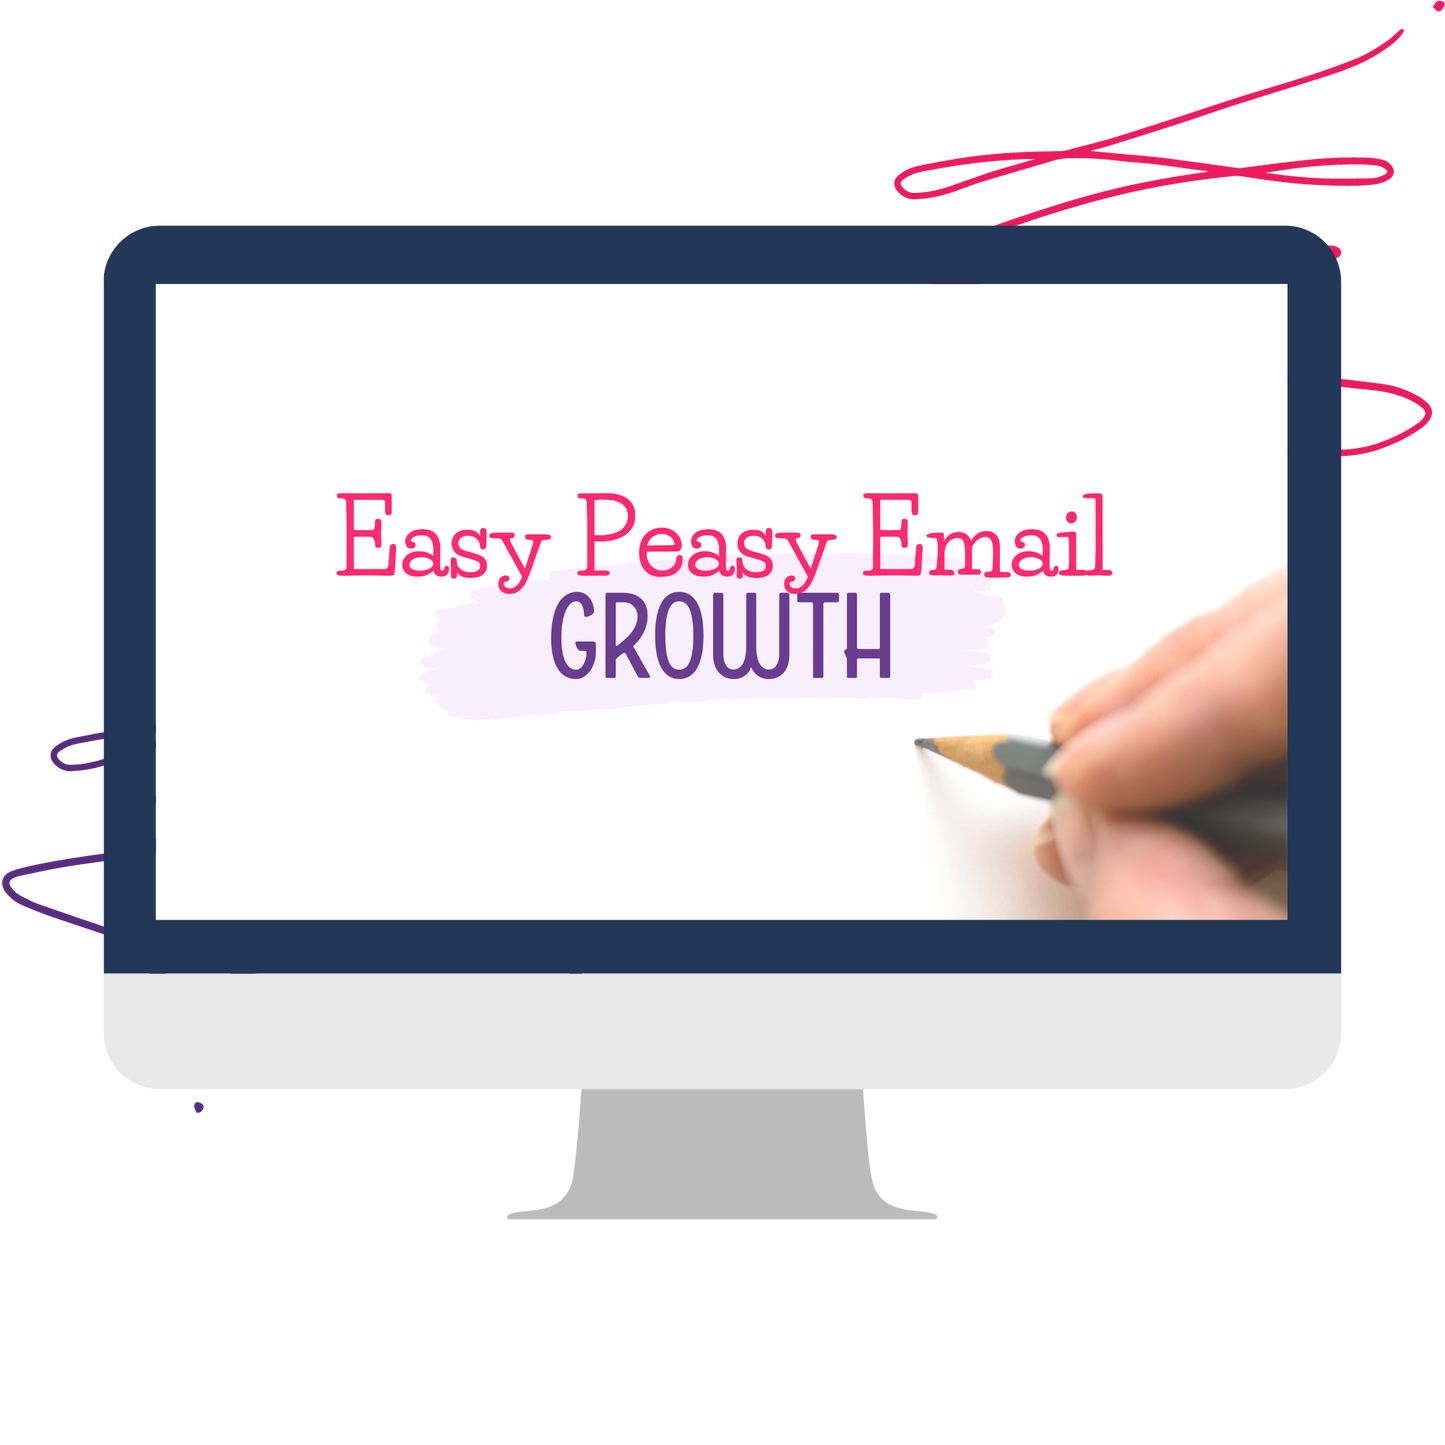 Easy Peasy Email Growth